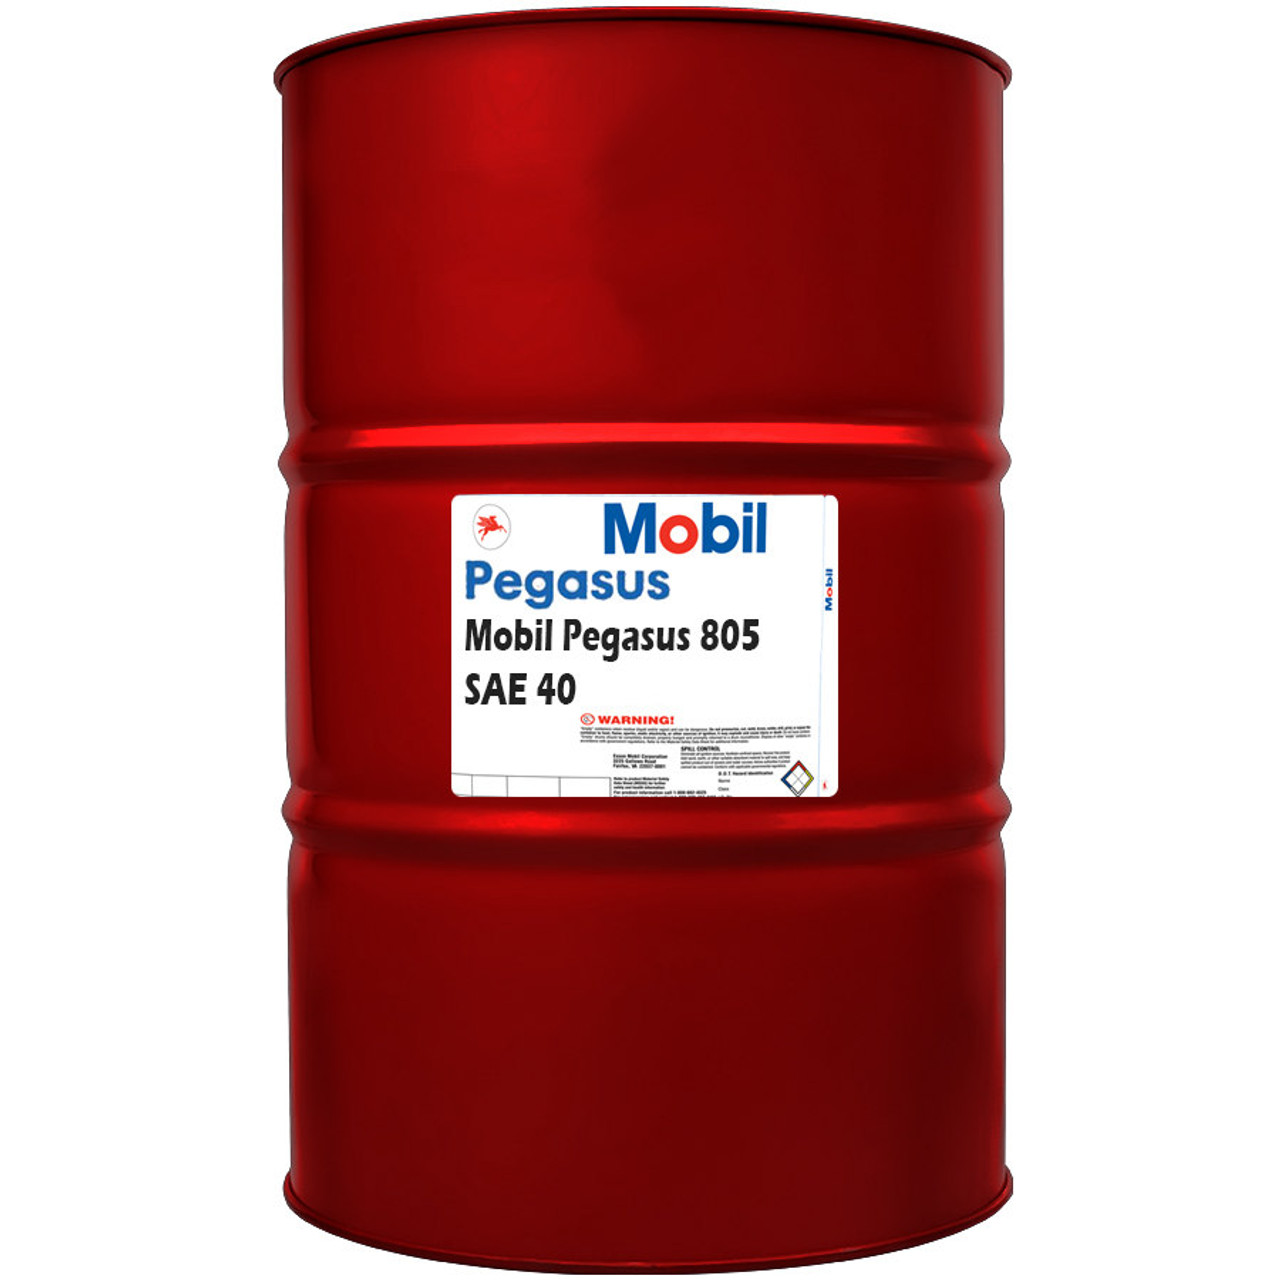 Propane gas and its industrial uses - GZ Industrial Supplies